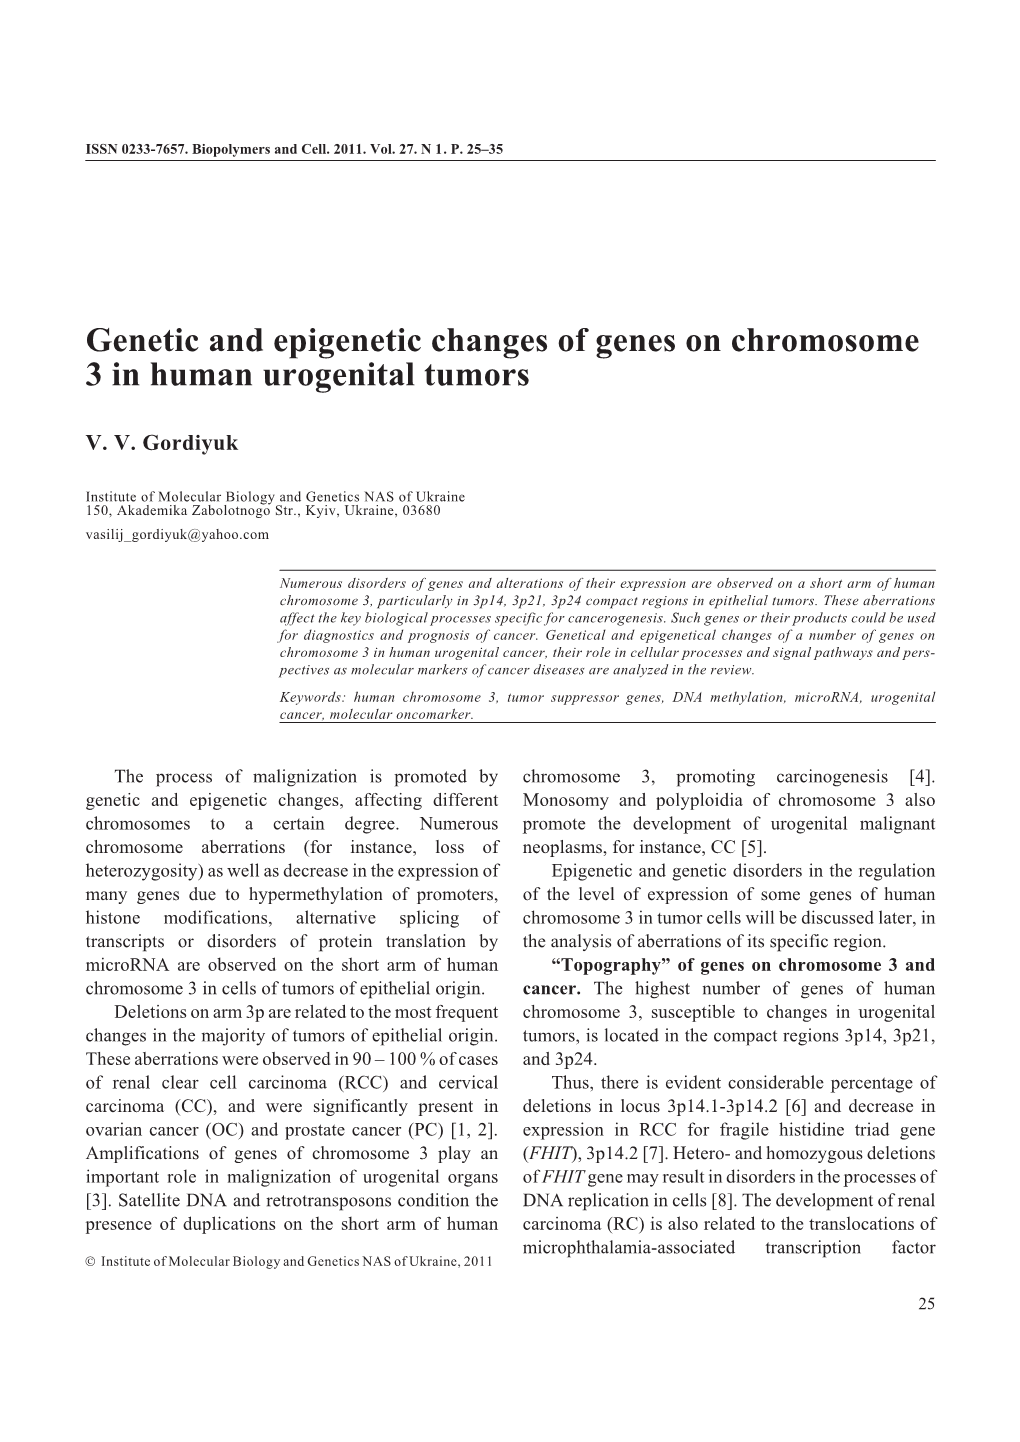 Genetic and Epigenetic Changes of Genes on Chromosome 3 in Human Urogenital Tumors